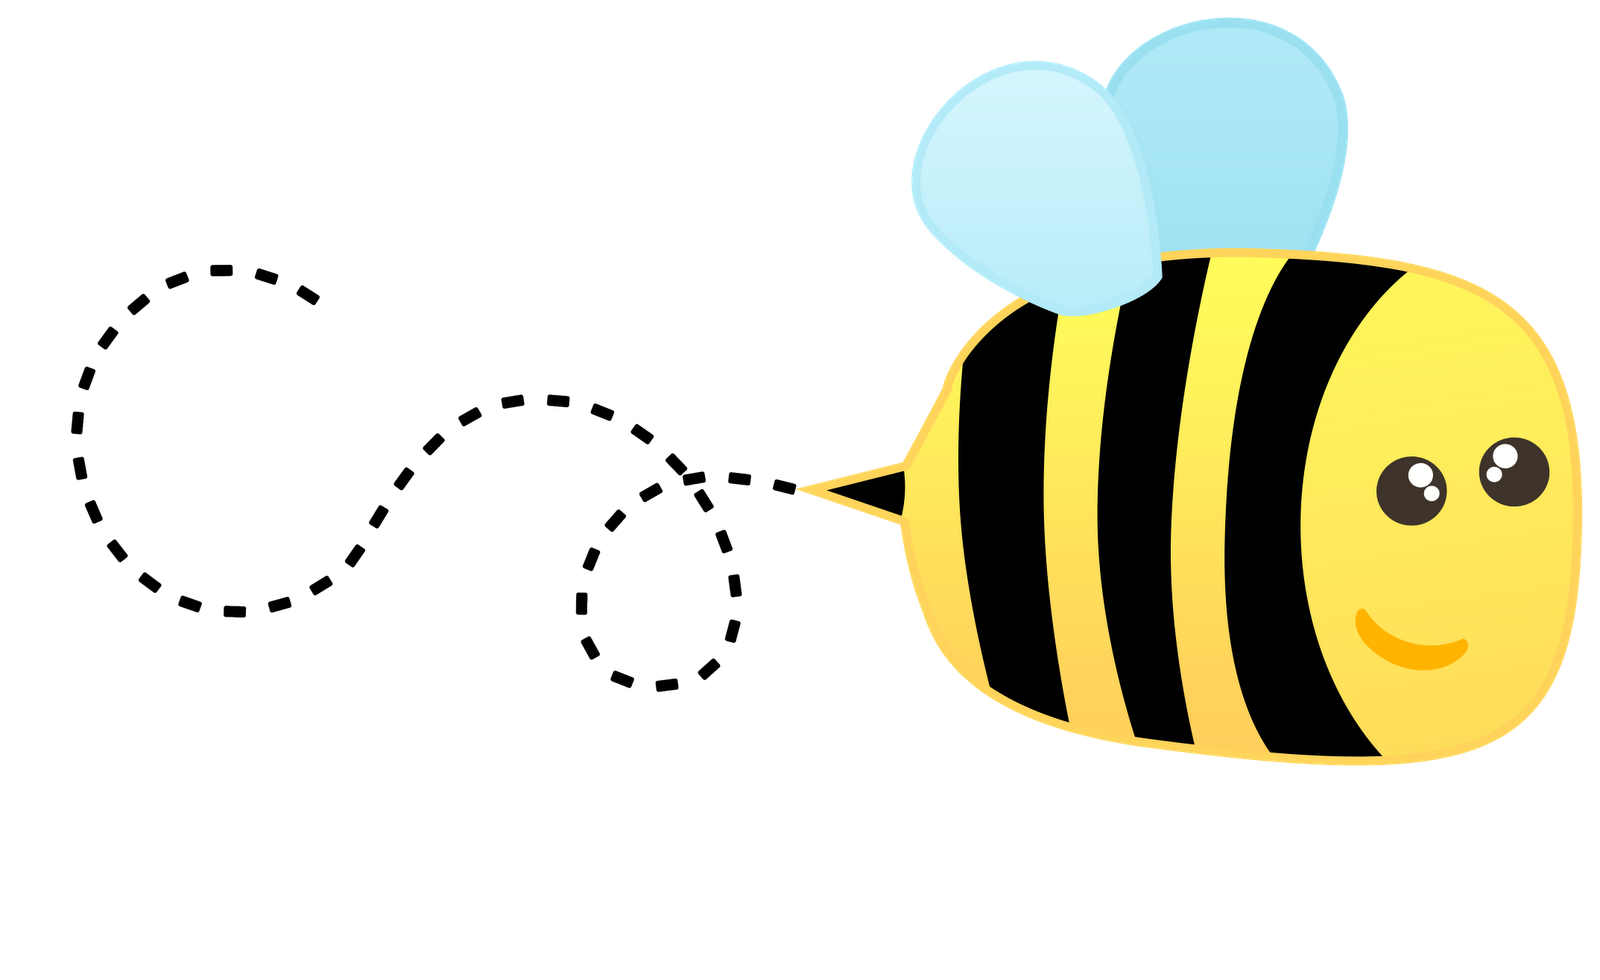 beehive clipart black and white - photo #17